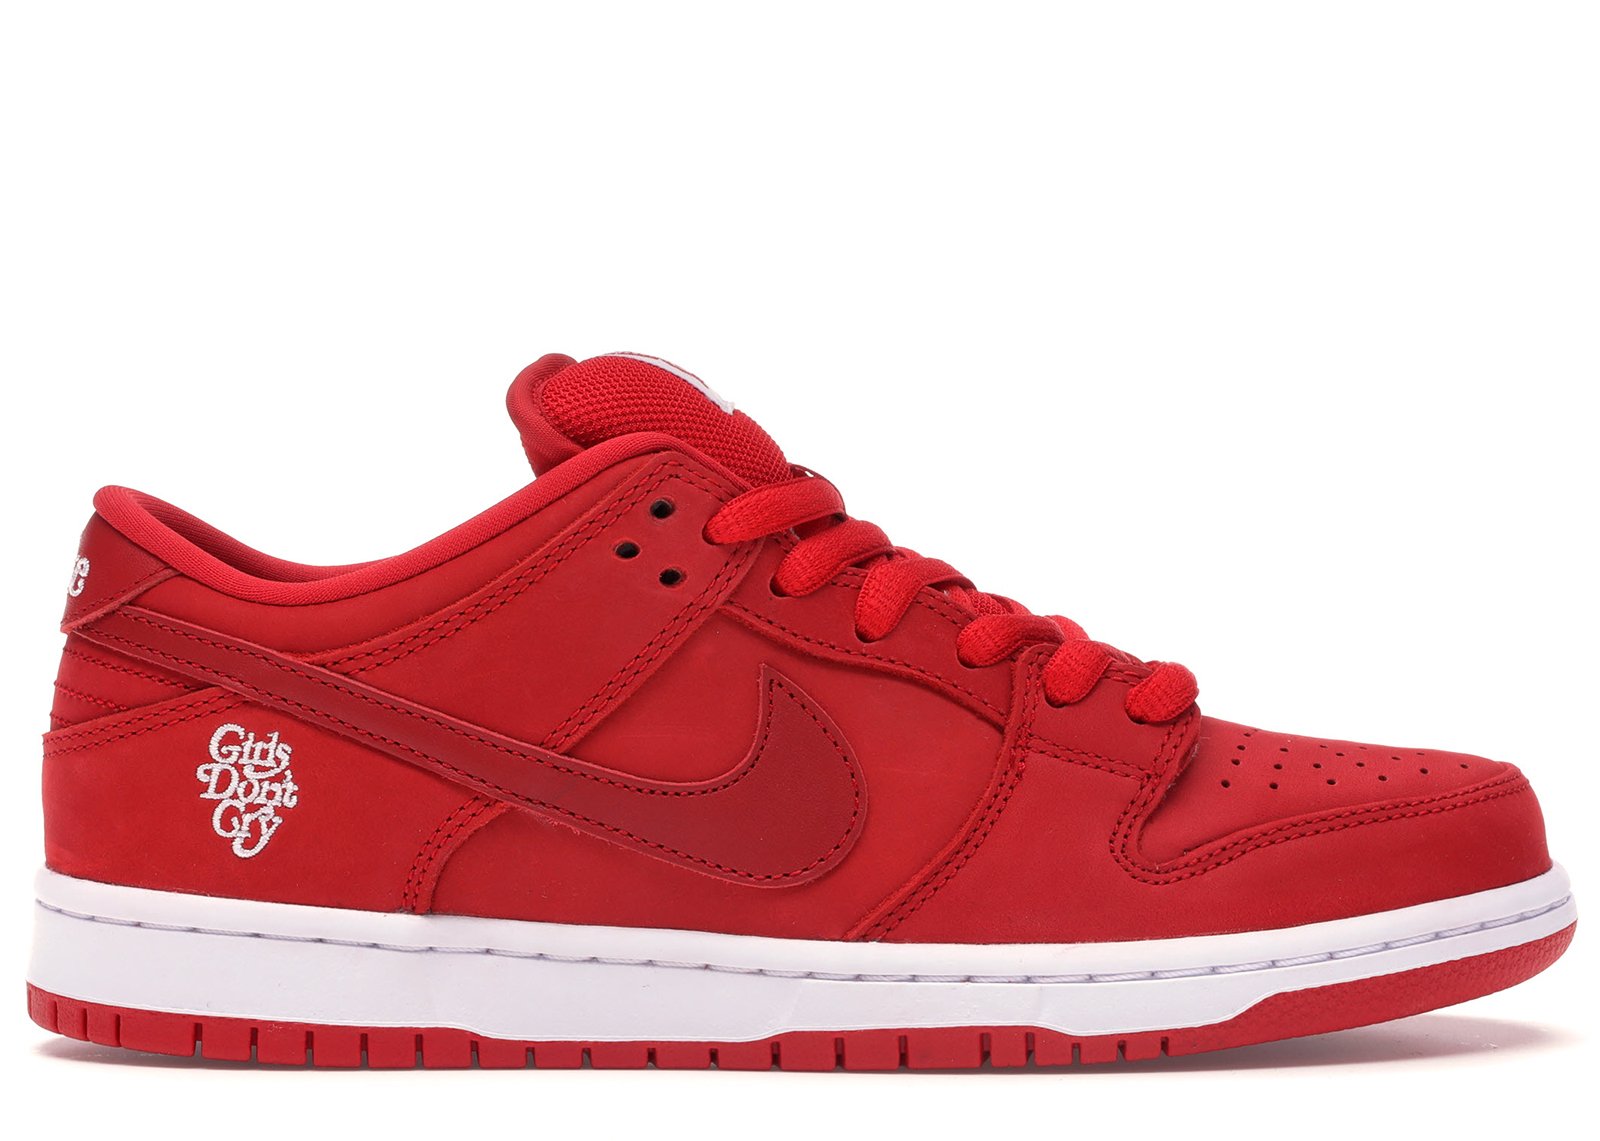 sneakers Nike SB Dunk Low Verdy Girls Don't Cry